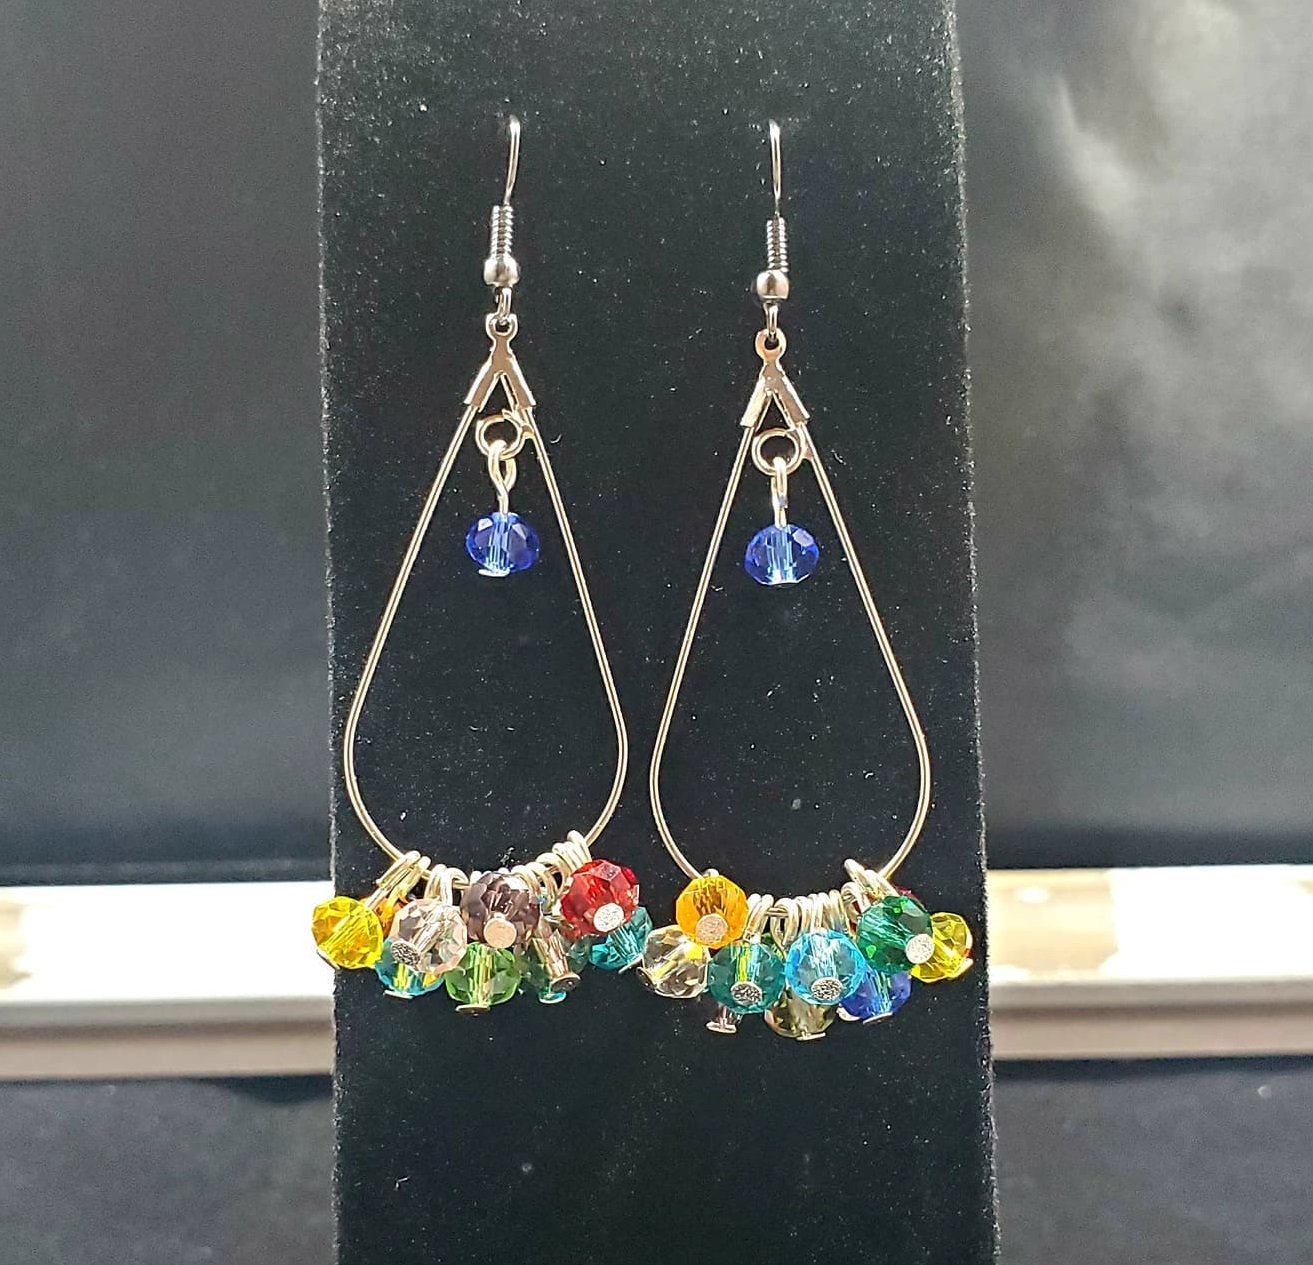 teardrop shaped earrings with a blue gem bead in the center and a rainbow of gem beads along the bottom